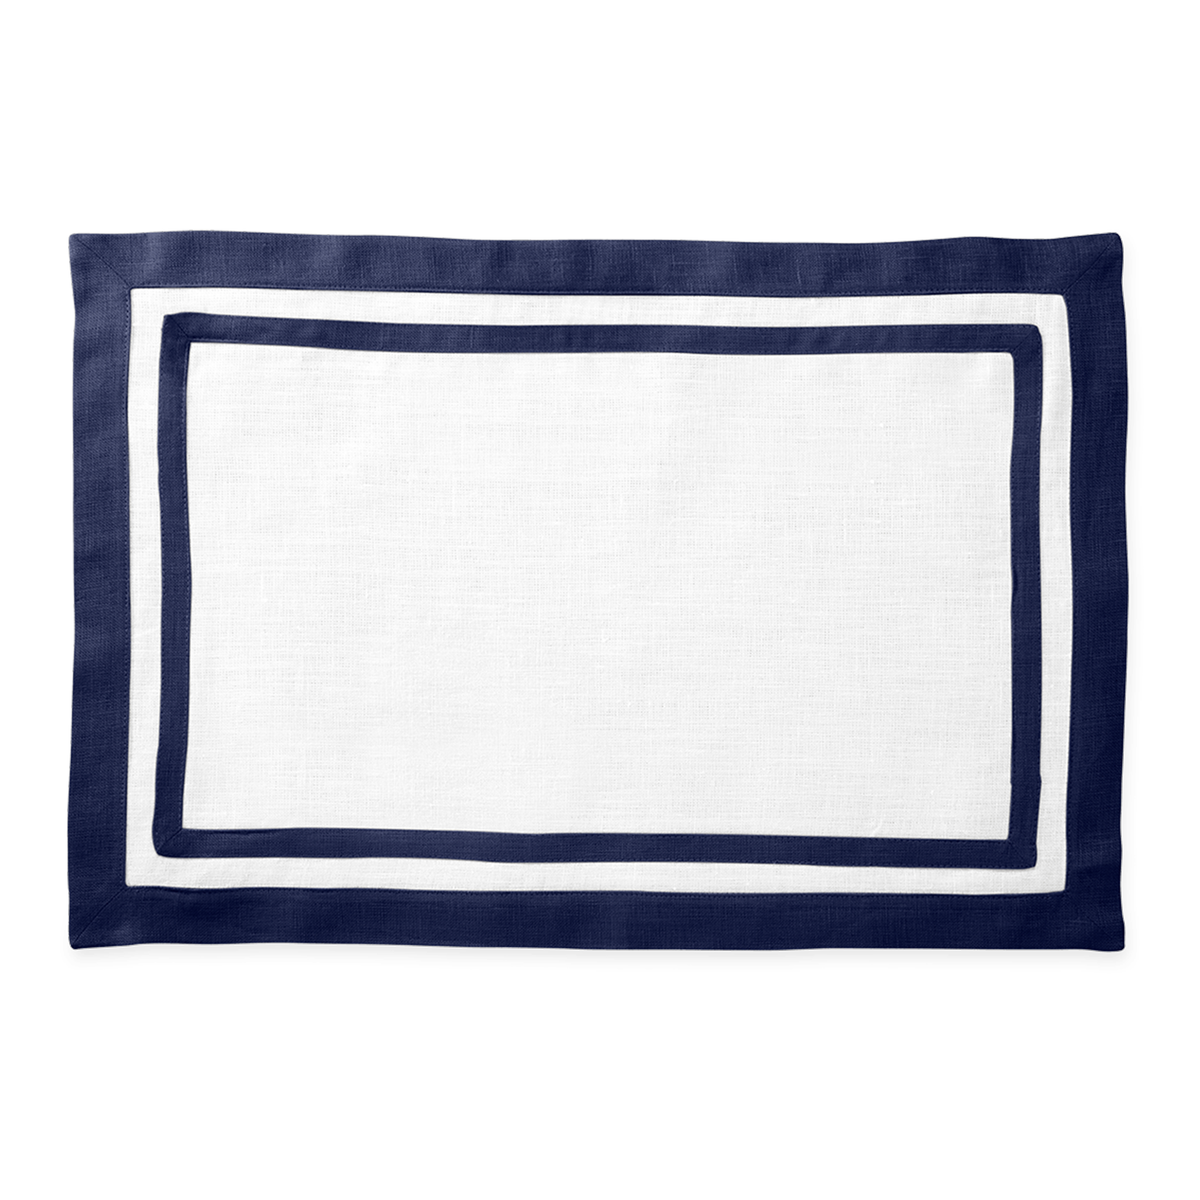 Silo Image of Matouk Double Border Rectangle Placemat in Color Sapphire